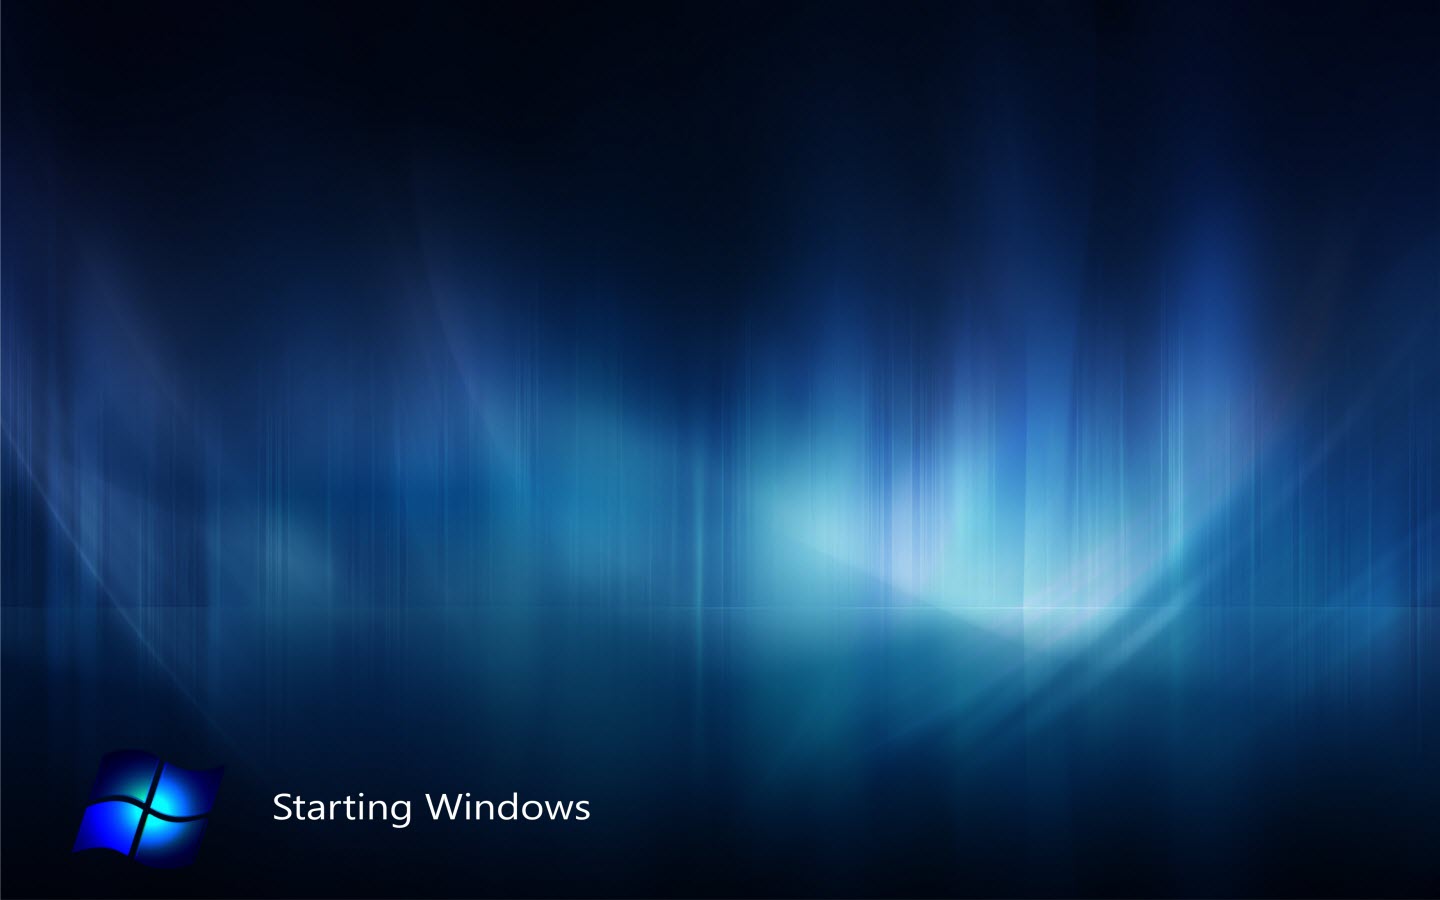 Awesome Windows8 Wallpaper For Your Desktop